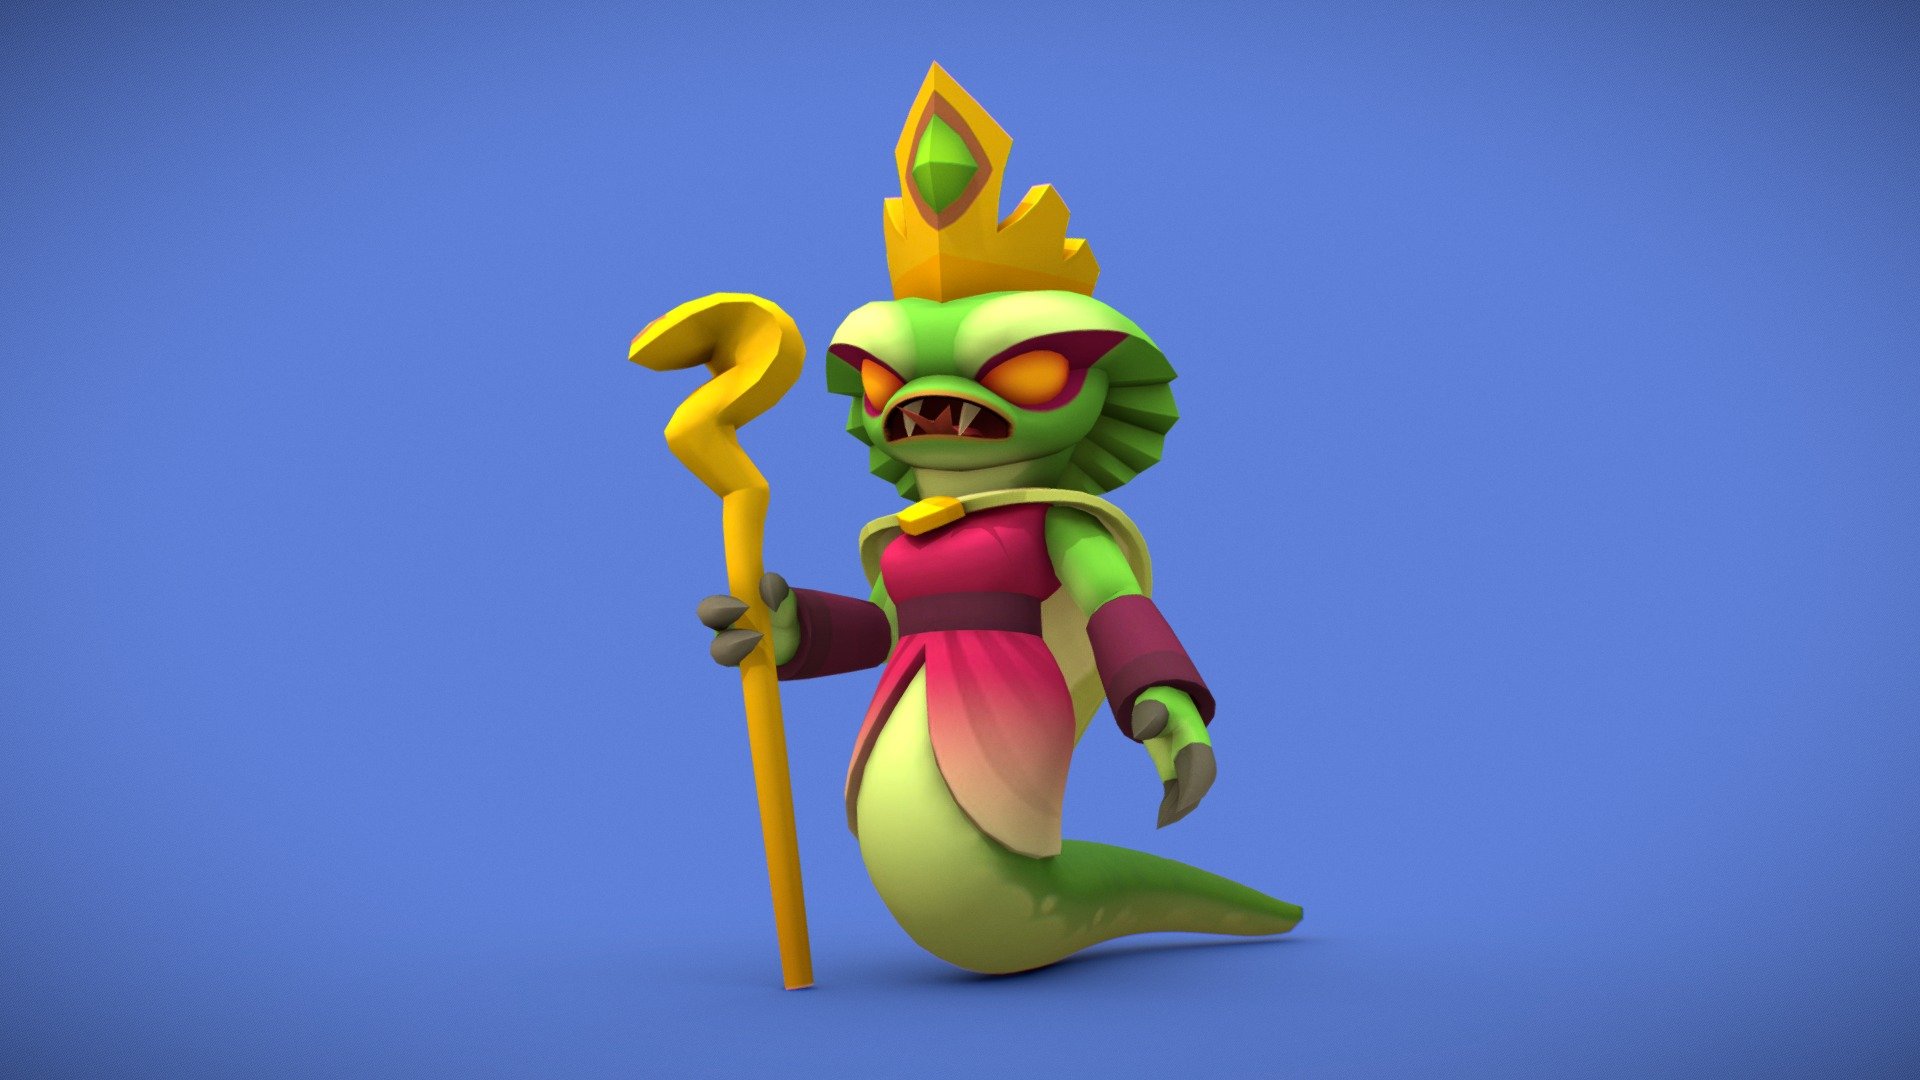 Serpent Mother boss model for mobile game &ldquo;Warrior Way – One Way Story